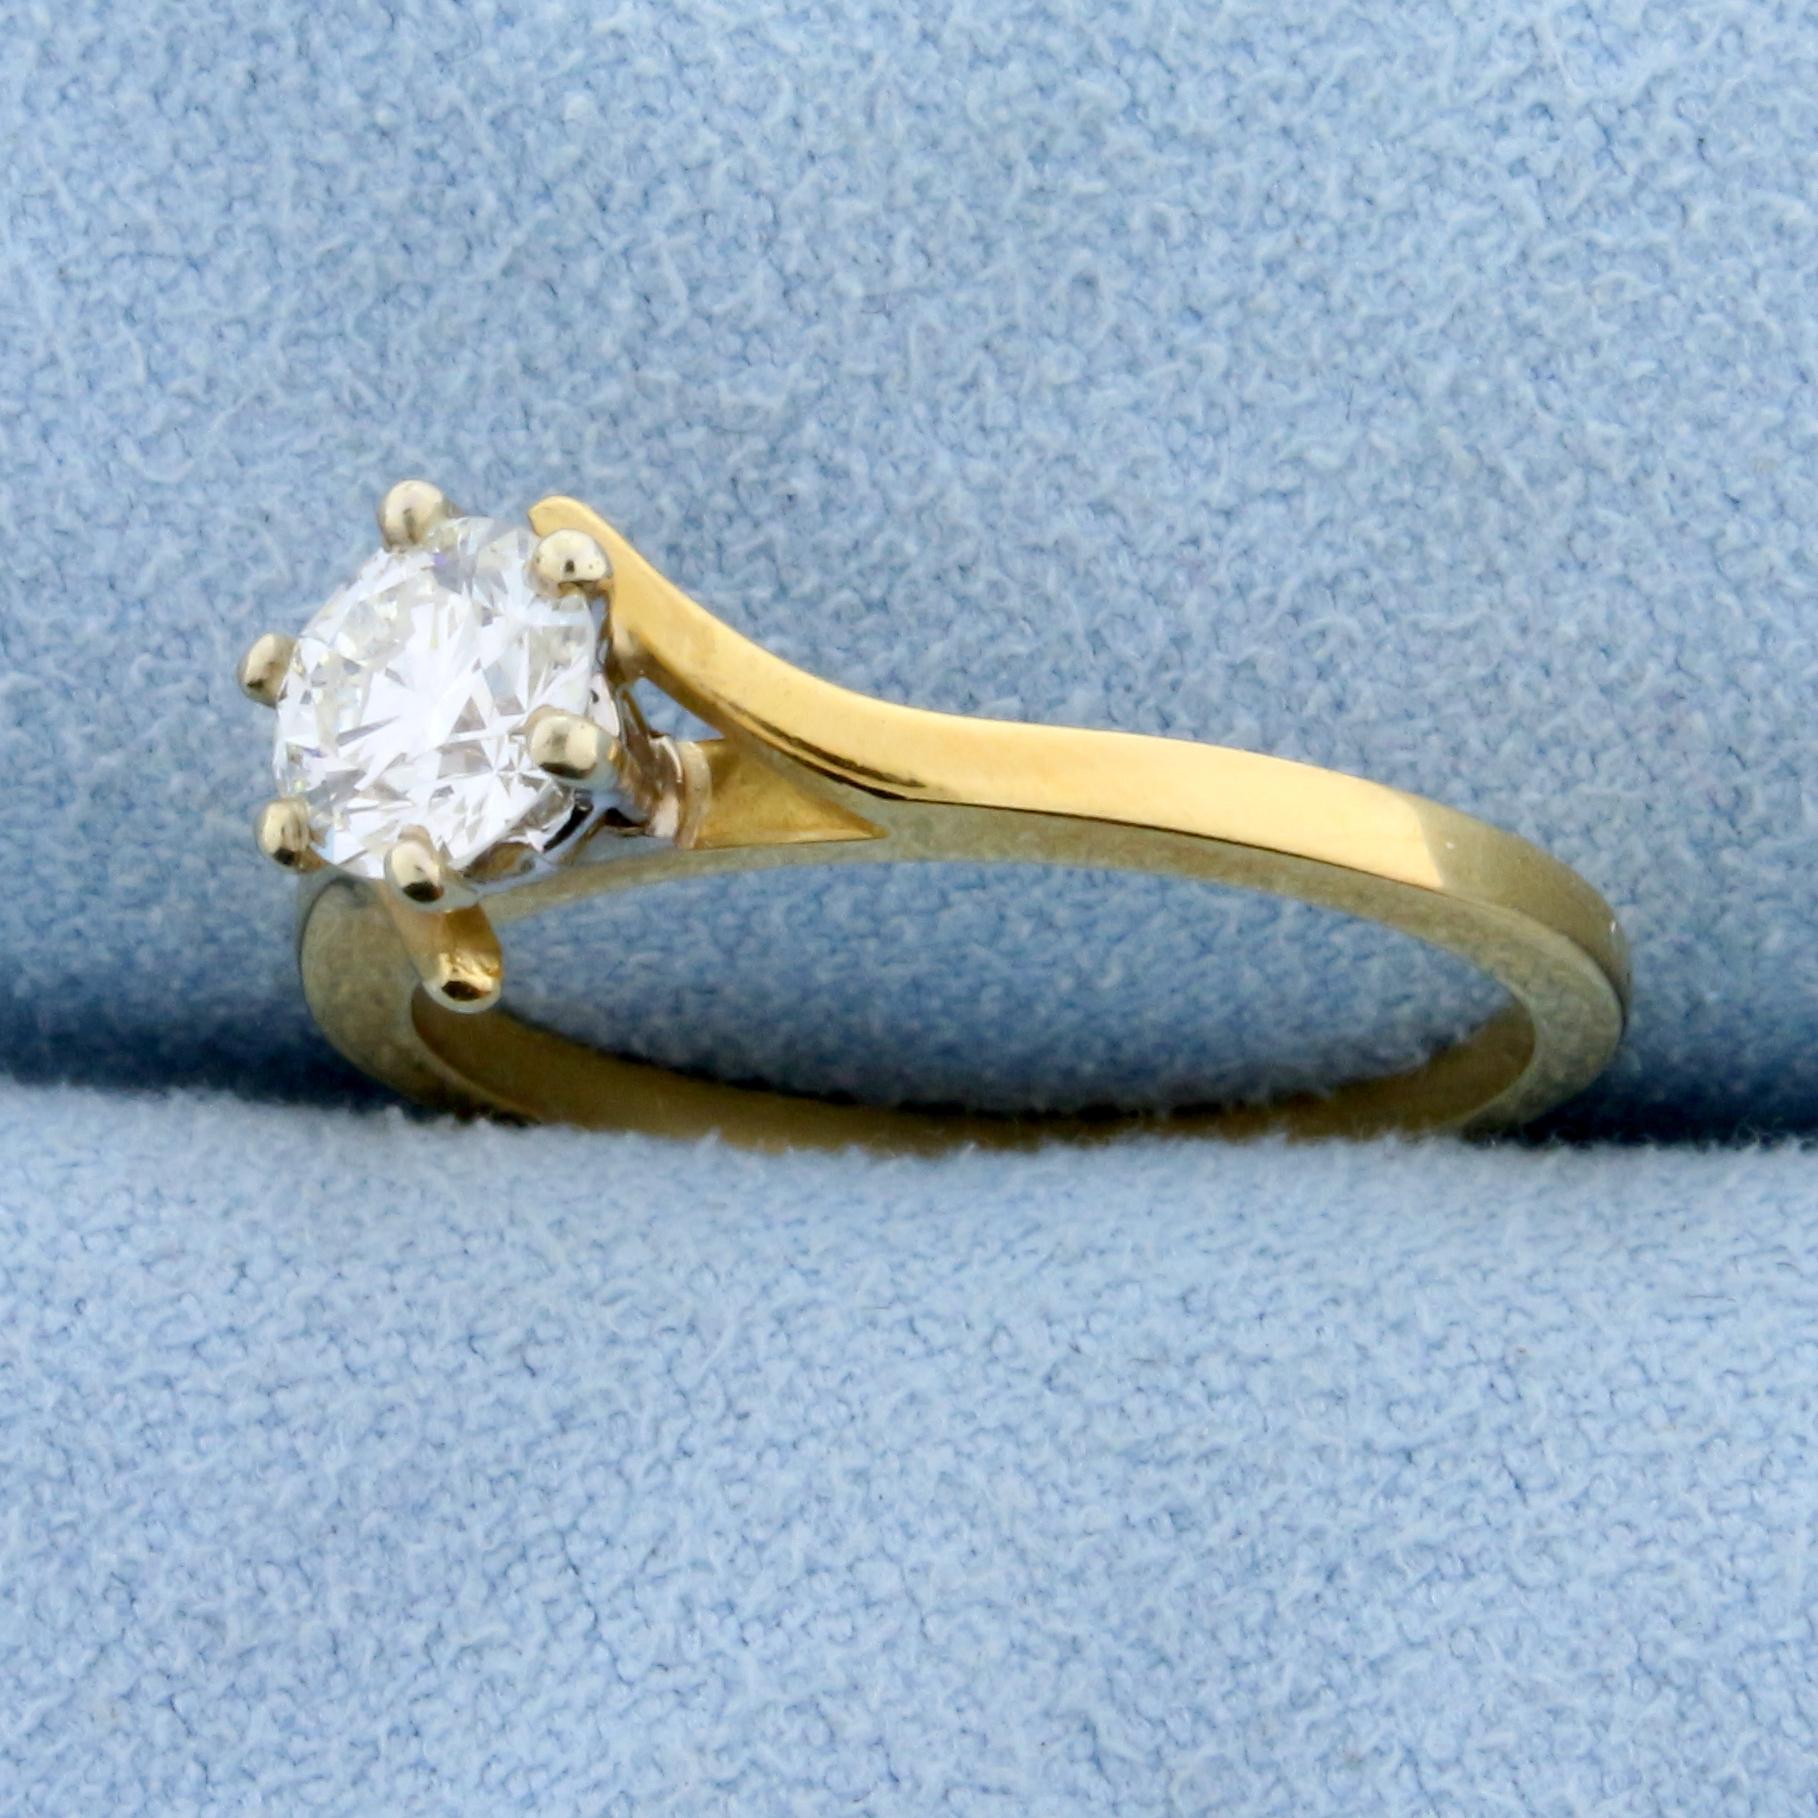 Over 1/2ct Diamond Solitaire Engagement Ring In 14k Yellow Gold Bypass Setting